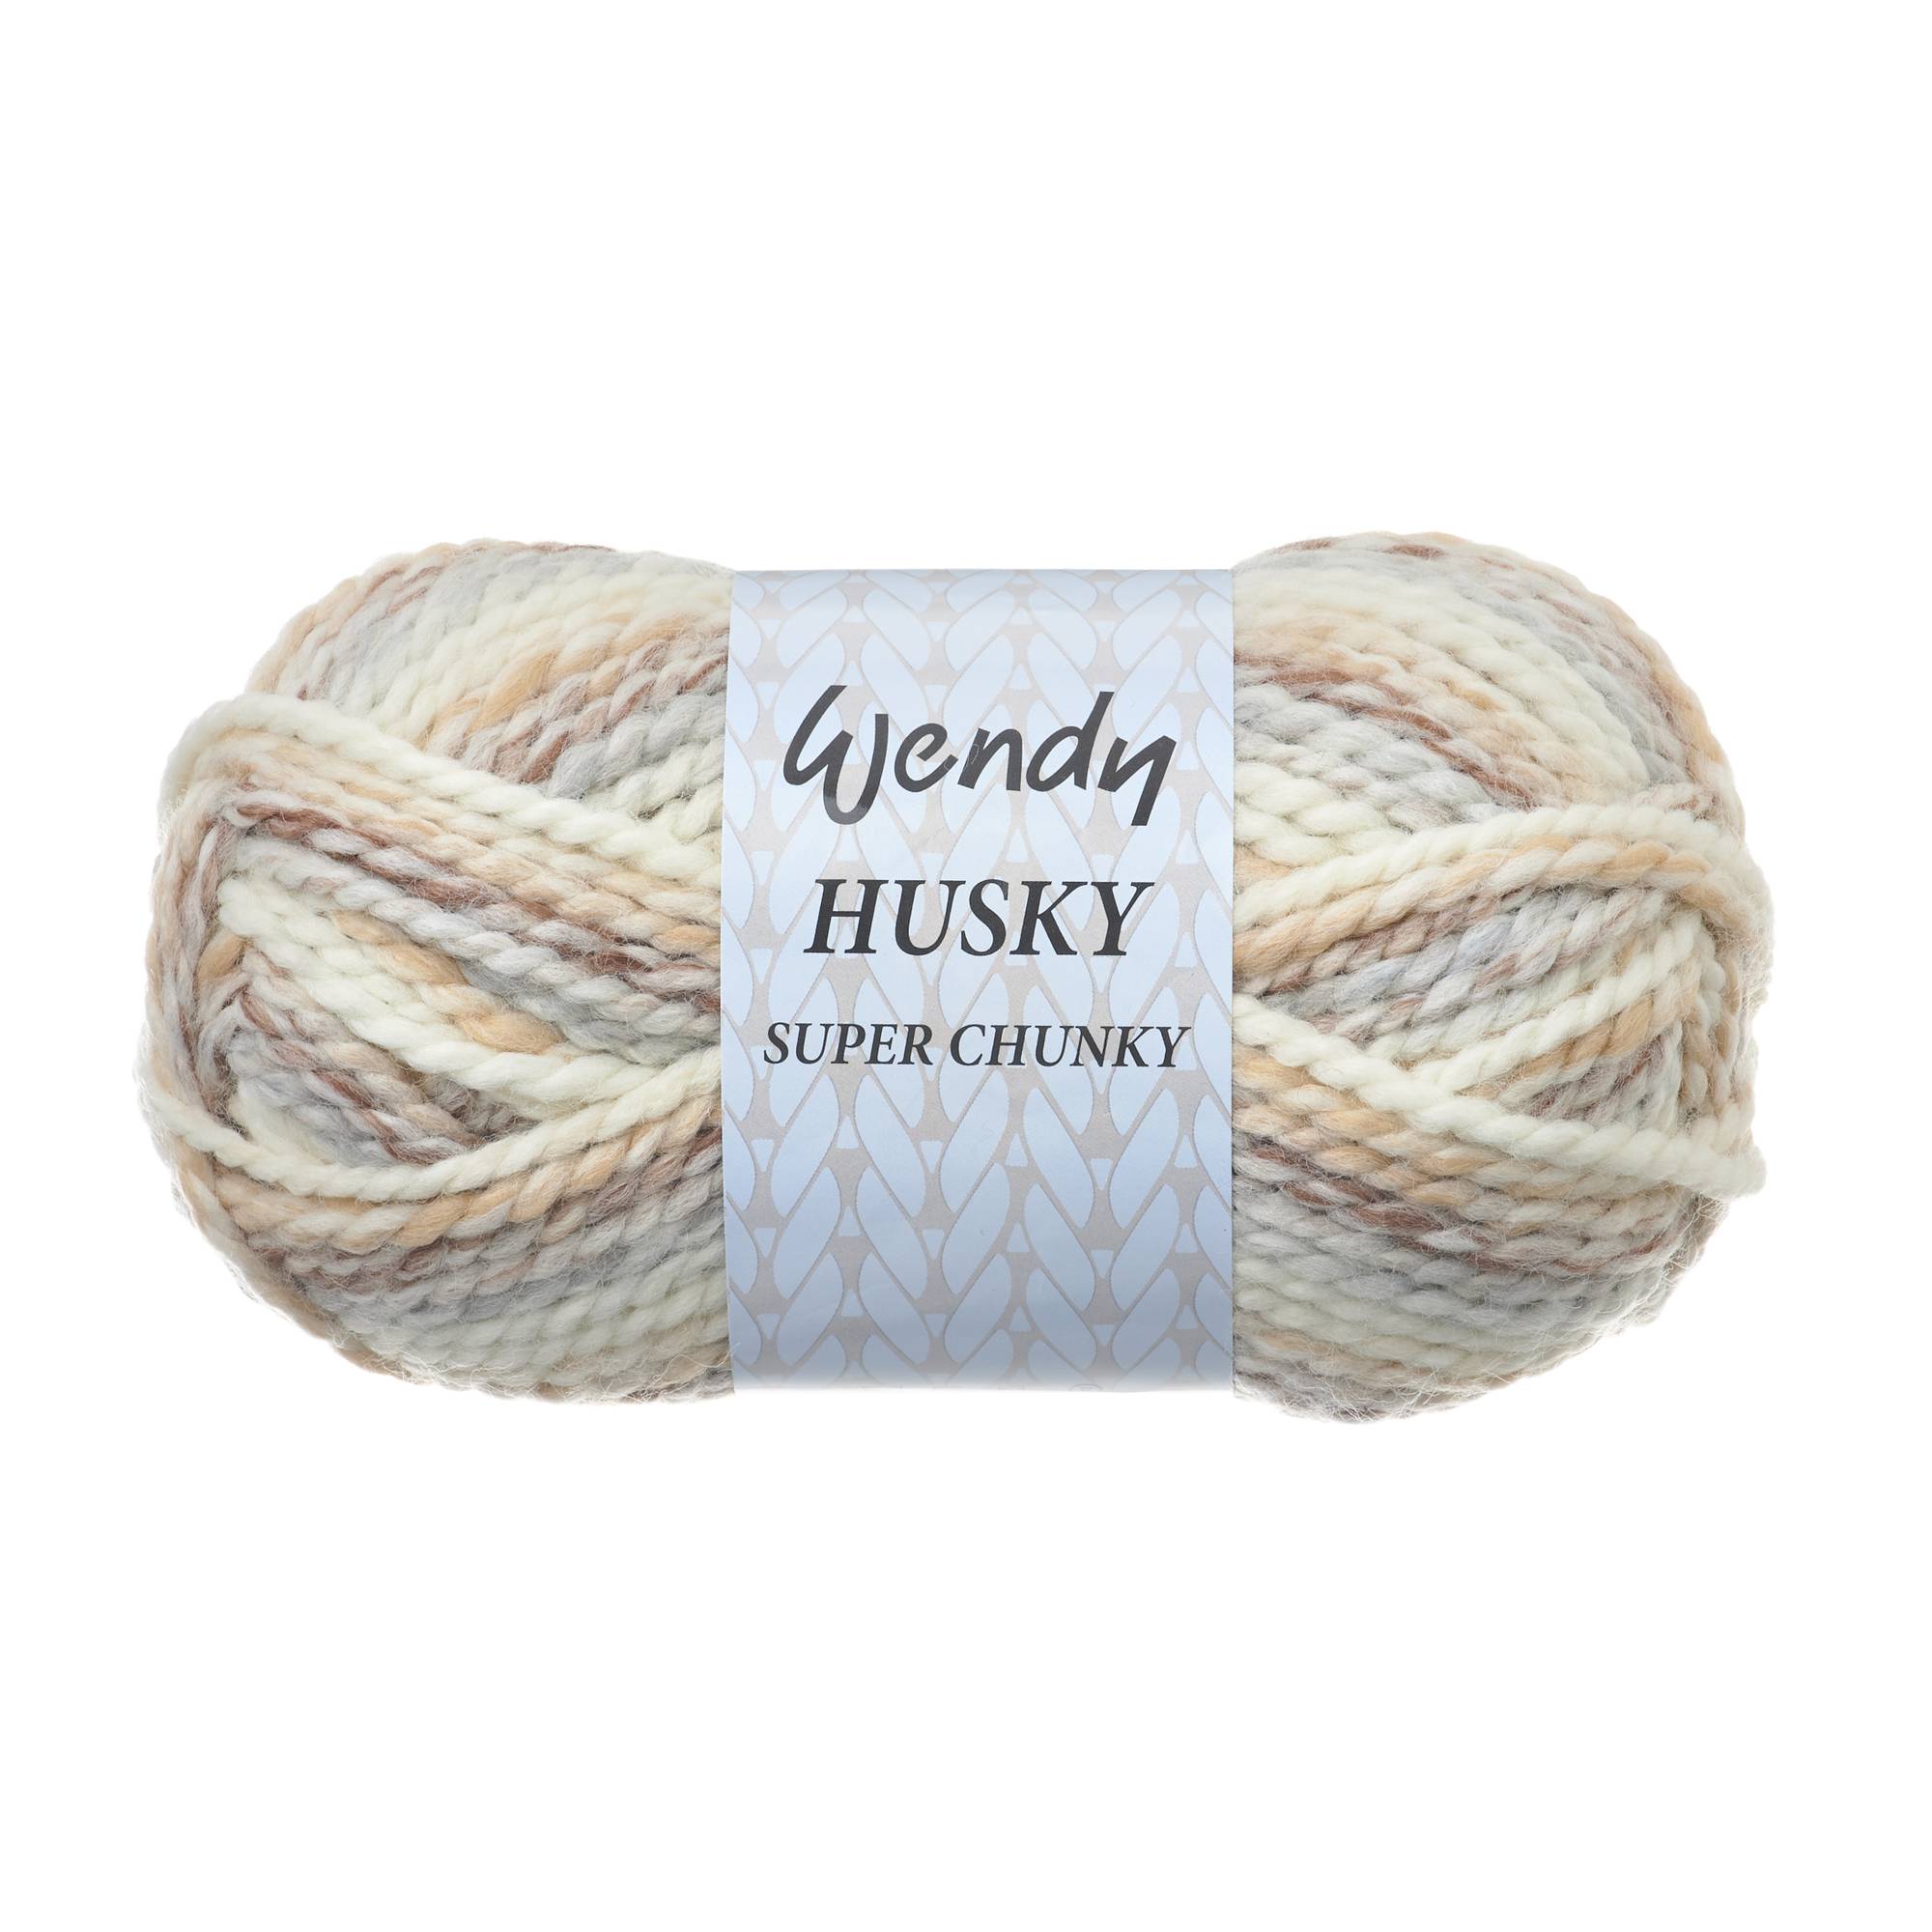 ggh Husky Box - 6 Balls - Thick Virgin Wool - Suitable for Knitting or  Crochet - Colour 013 - North Sea Green : Buy Online at Best Price in KSA -  Souq is now : Arts & Crafts